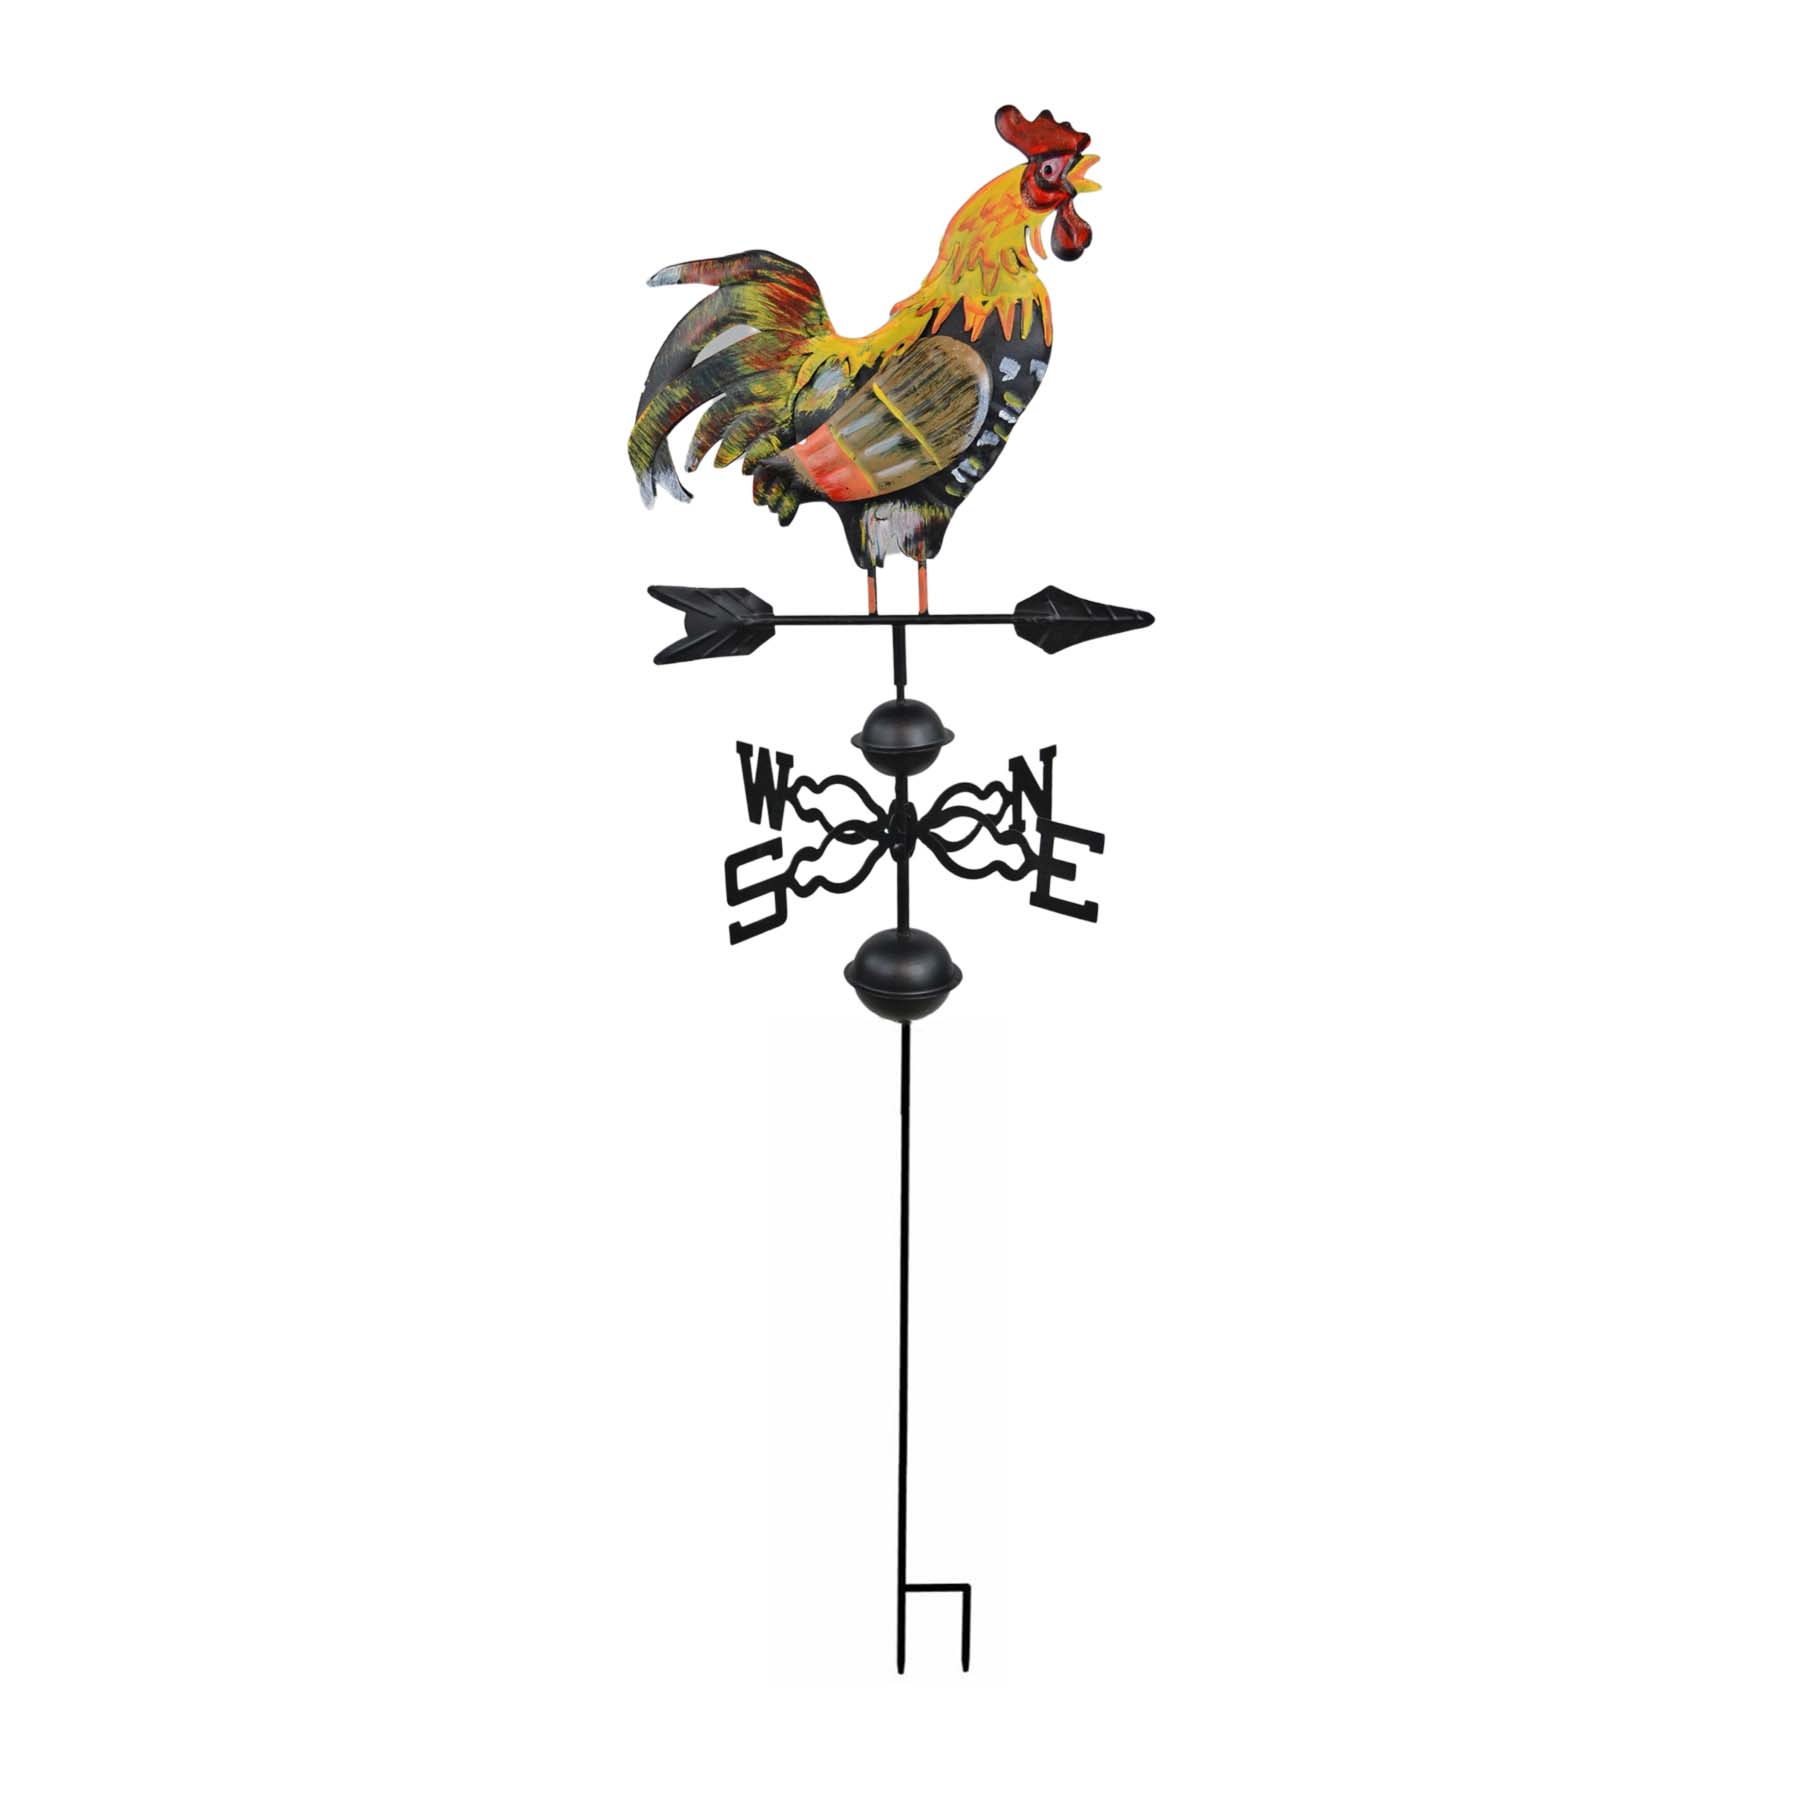 Montague Metal Products WV-176 100 Series 24 In. Rooster Weathervane 並行輸入品  オーナメント、オブジェ